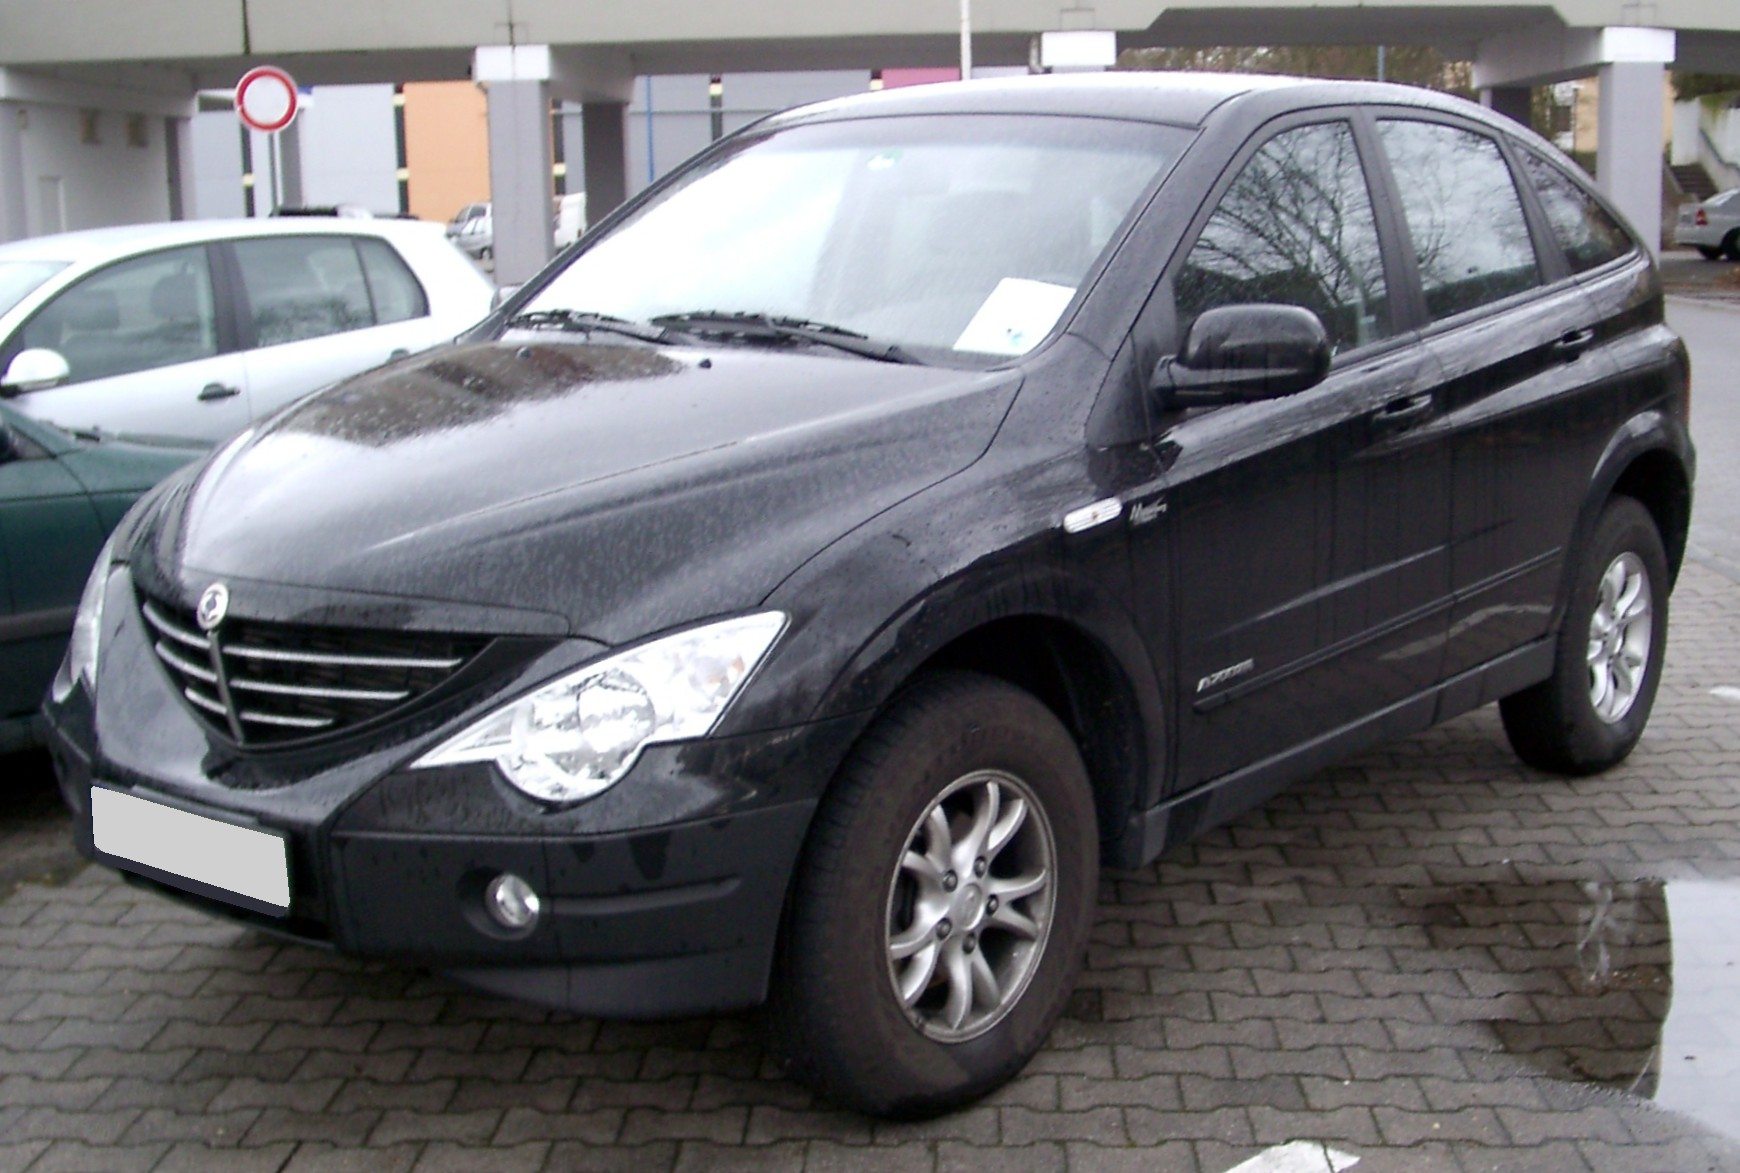 SsangYong_Actyon_front_20080303